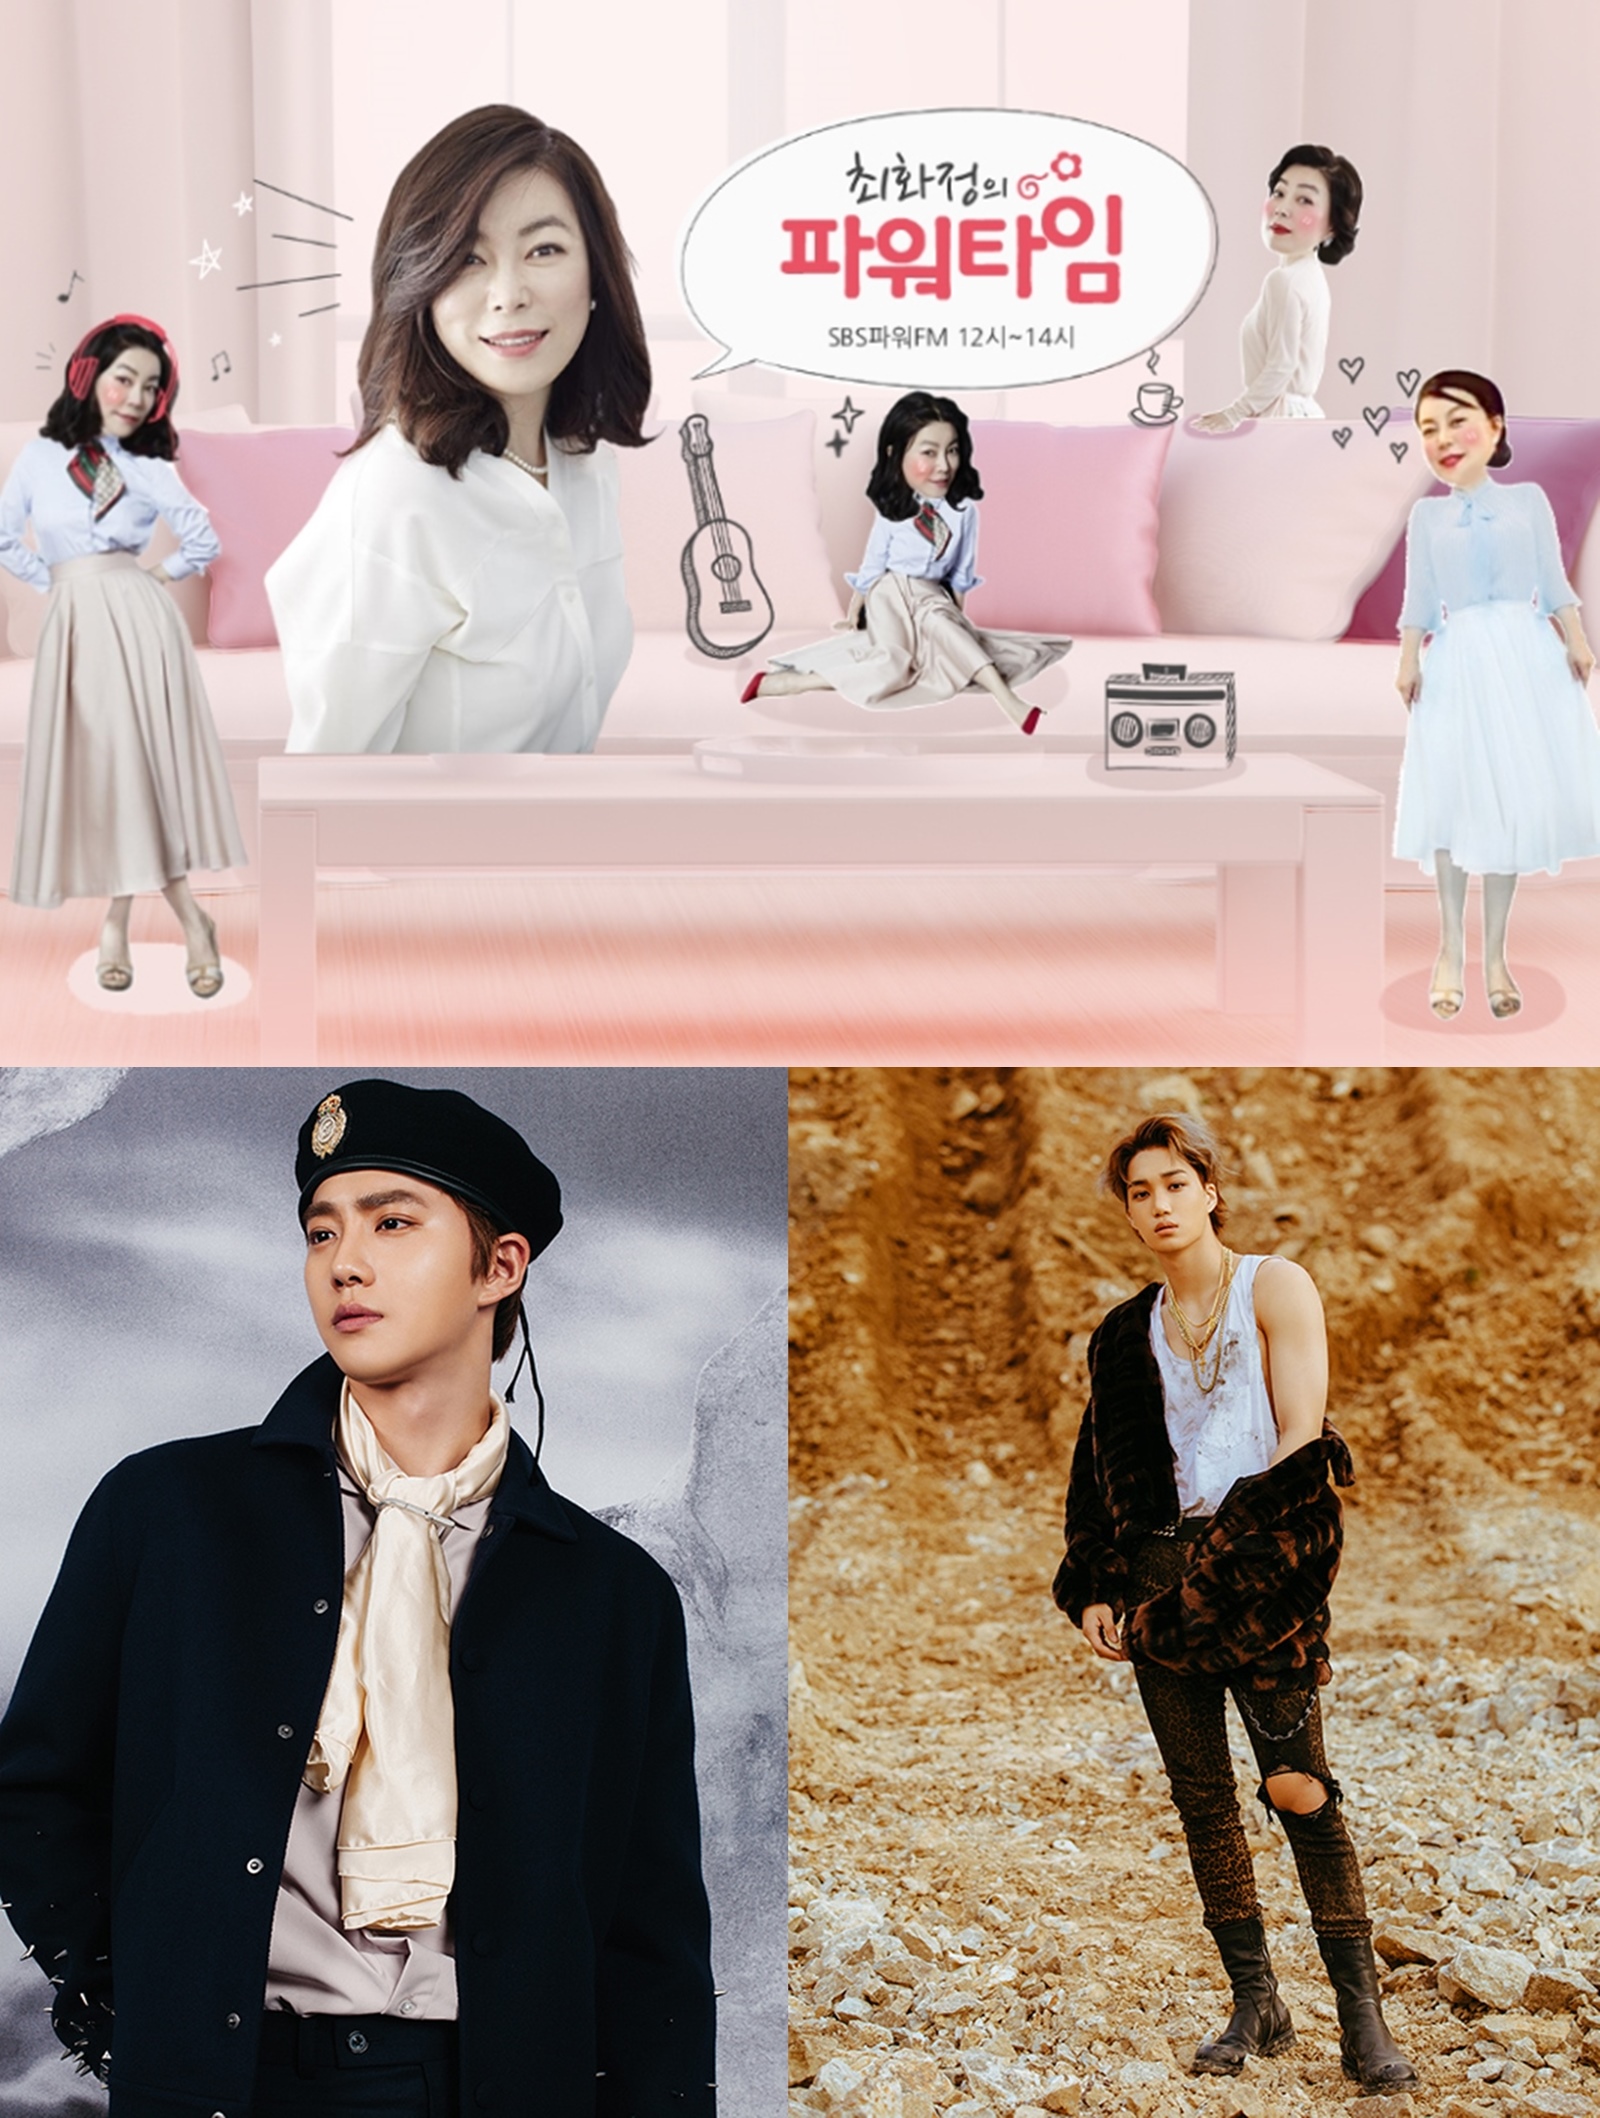 K-pop representative group EXO Suho and Kai will make a surprise appearance in Power Time of Hwa-Jeong Choi (hereinafter referred to as Choi Fata).EXO Suho and Kai will appear on Choi Fata, which will be broadcast on the 12th.EXO is once again proving its downside to the K-pop King, which won the top spot on domestic and overseas charts at the same time as its comeback with its regular 5th album DONT MESS UP MY TEMPO.On this day, Suho and Kai will tell about the recent events such as the story of this album work and overseas activities.In particular, this appearance of Choi Fata is the only radio schedule of this album activity, which raises even greater expectations.The Power Time of Hwa-Jeong Choi, starring Suho and Kai, will be heard on SBS Power FM and Internet radio gorillas from 12 p.m. to 2 p.m. on the 12th, and will also be broadcast live on Radio.Photo Offering SBS